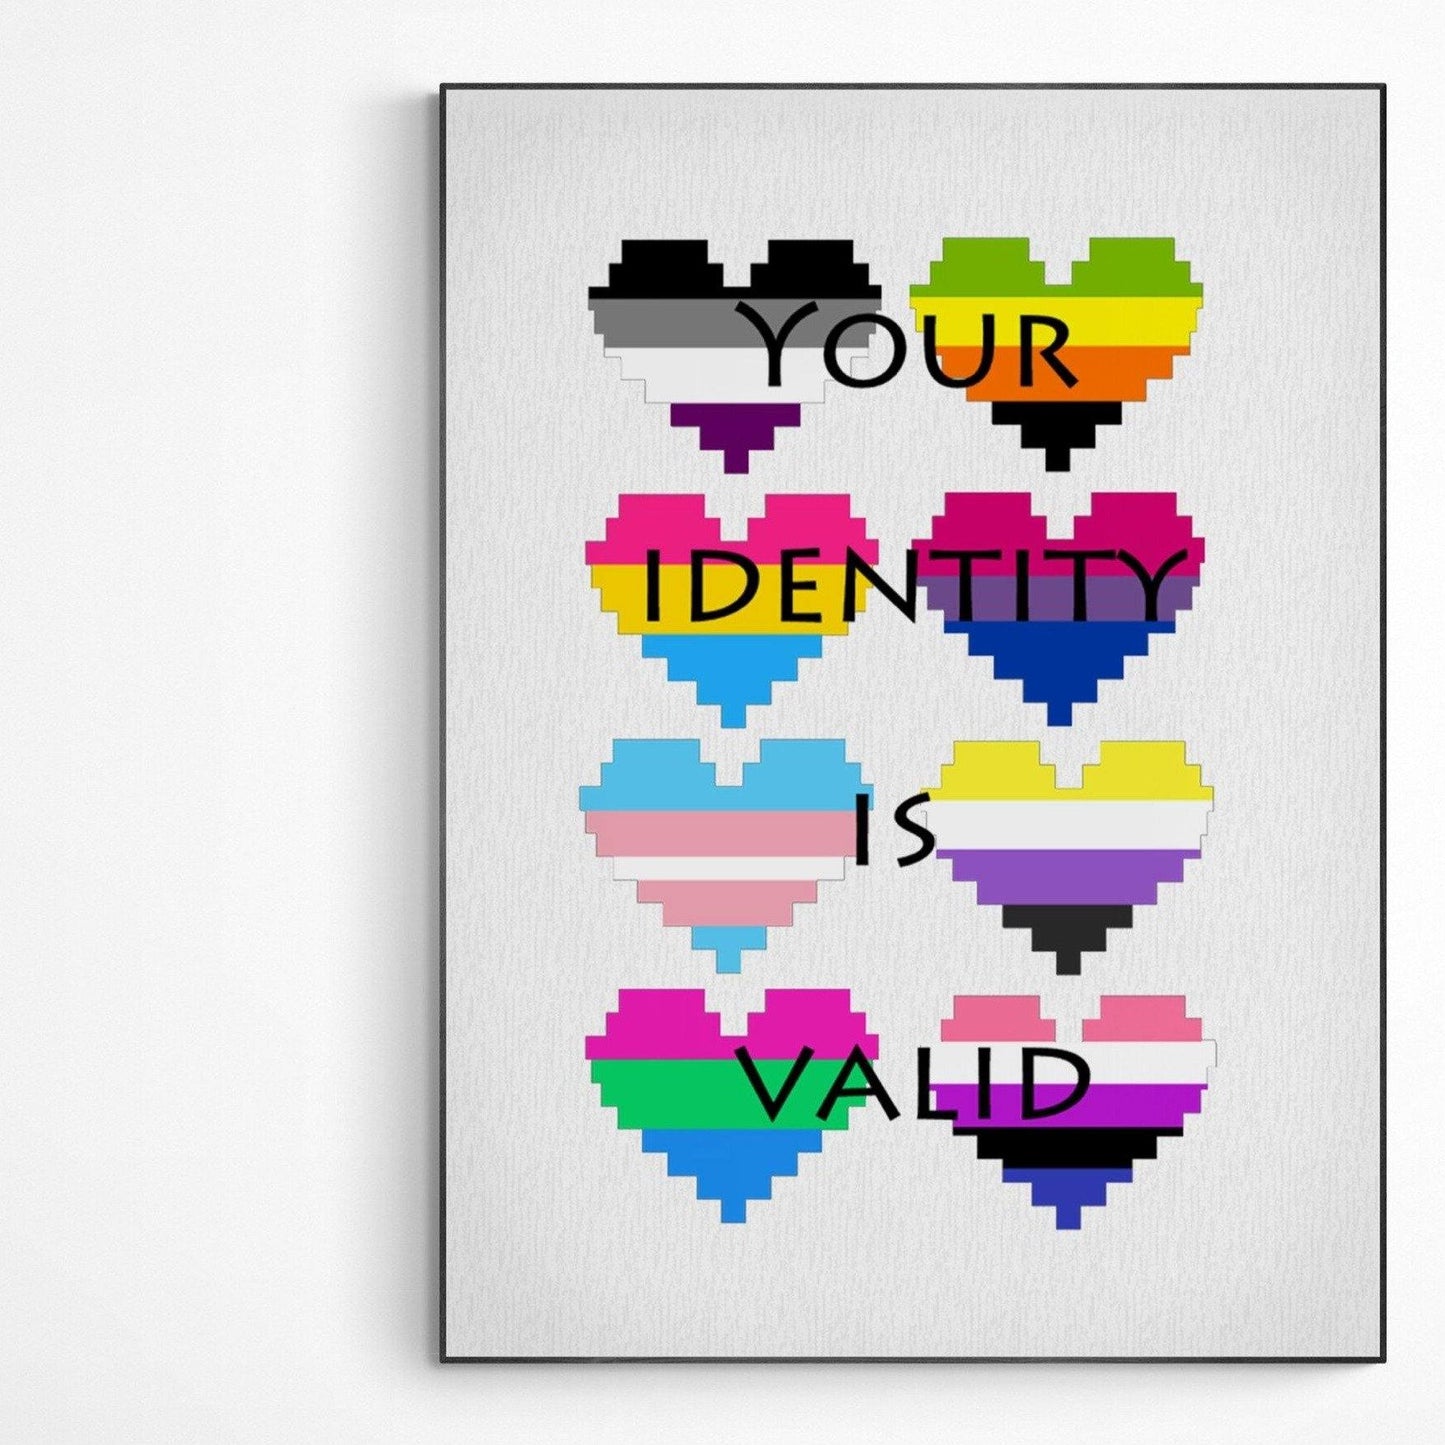 Spread love and joy with this Love is Love print. It doesn't matter who you love, just love love. This gay pride print is perfect for your living room or as a gift for your friends and family. With its bright colors and positive message, this print is sure to add some happiness to your home.